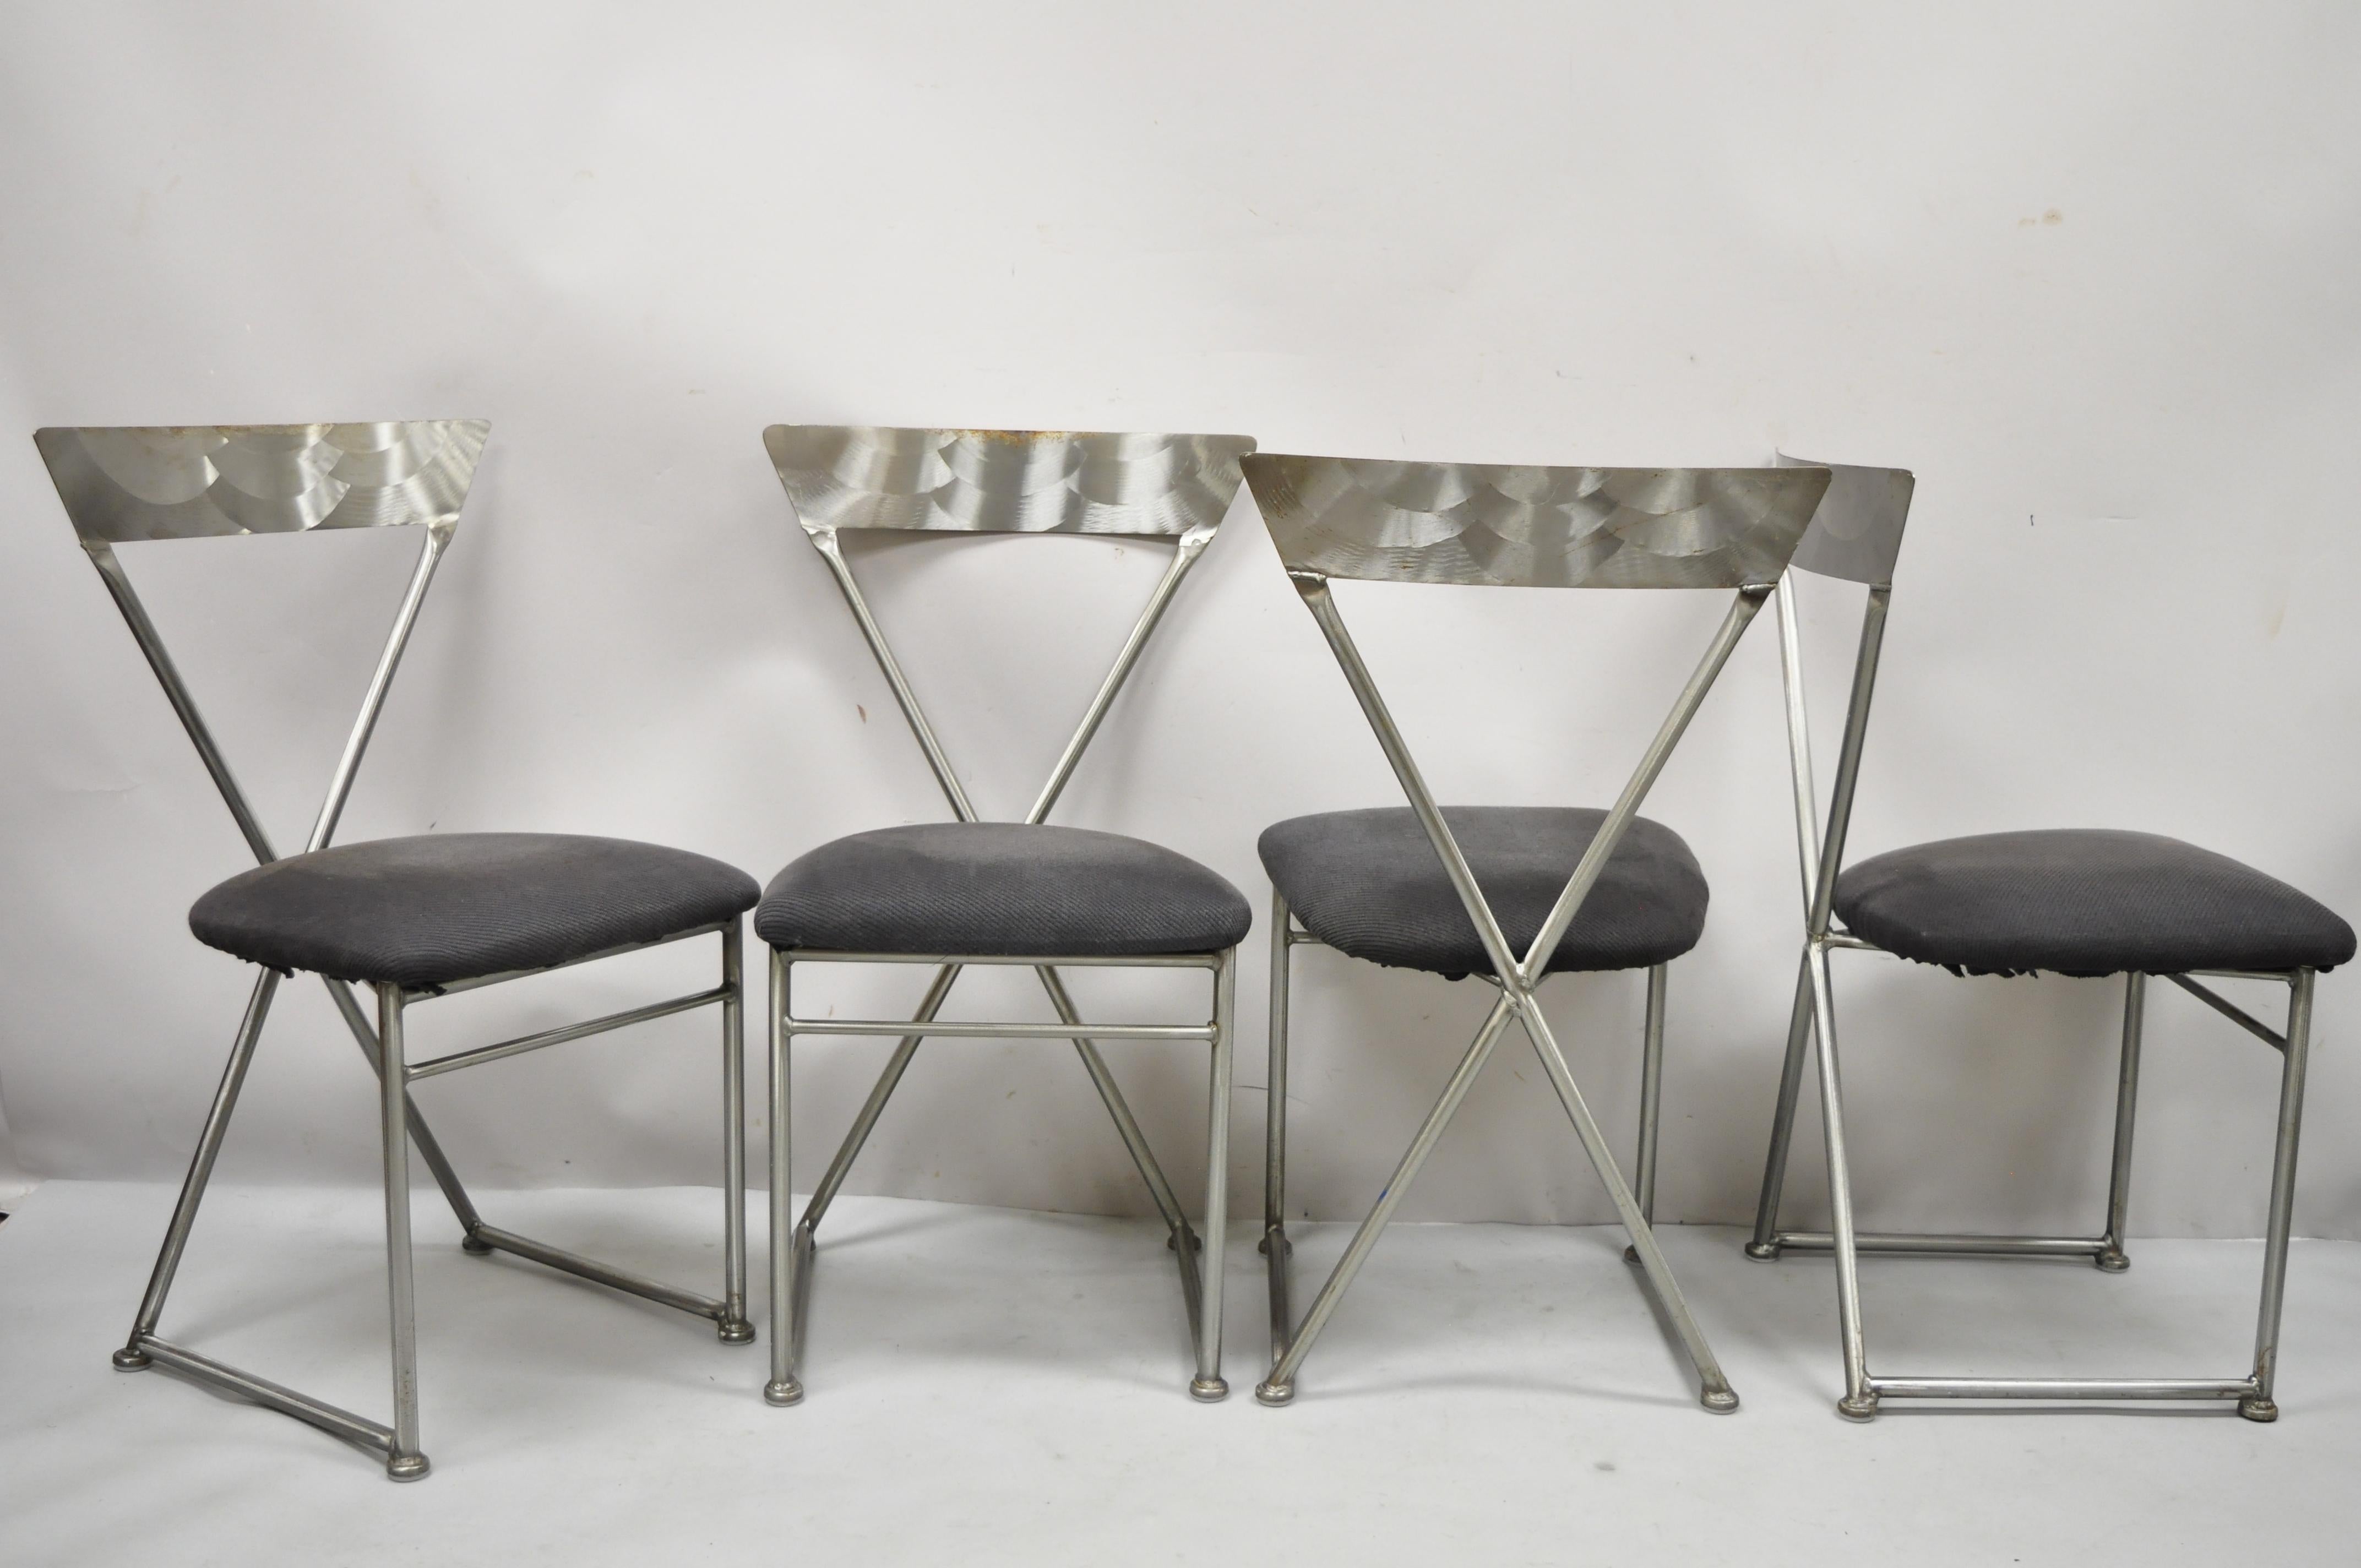 Shaver Howard Modernist Italian style brushed steel metal dining chairs, set of 4. Item features (4) side chairs, brushed steel metal frames, original labels, very nice vintage set, quality American craftsmanship, great style and form, Circa late